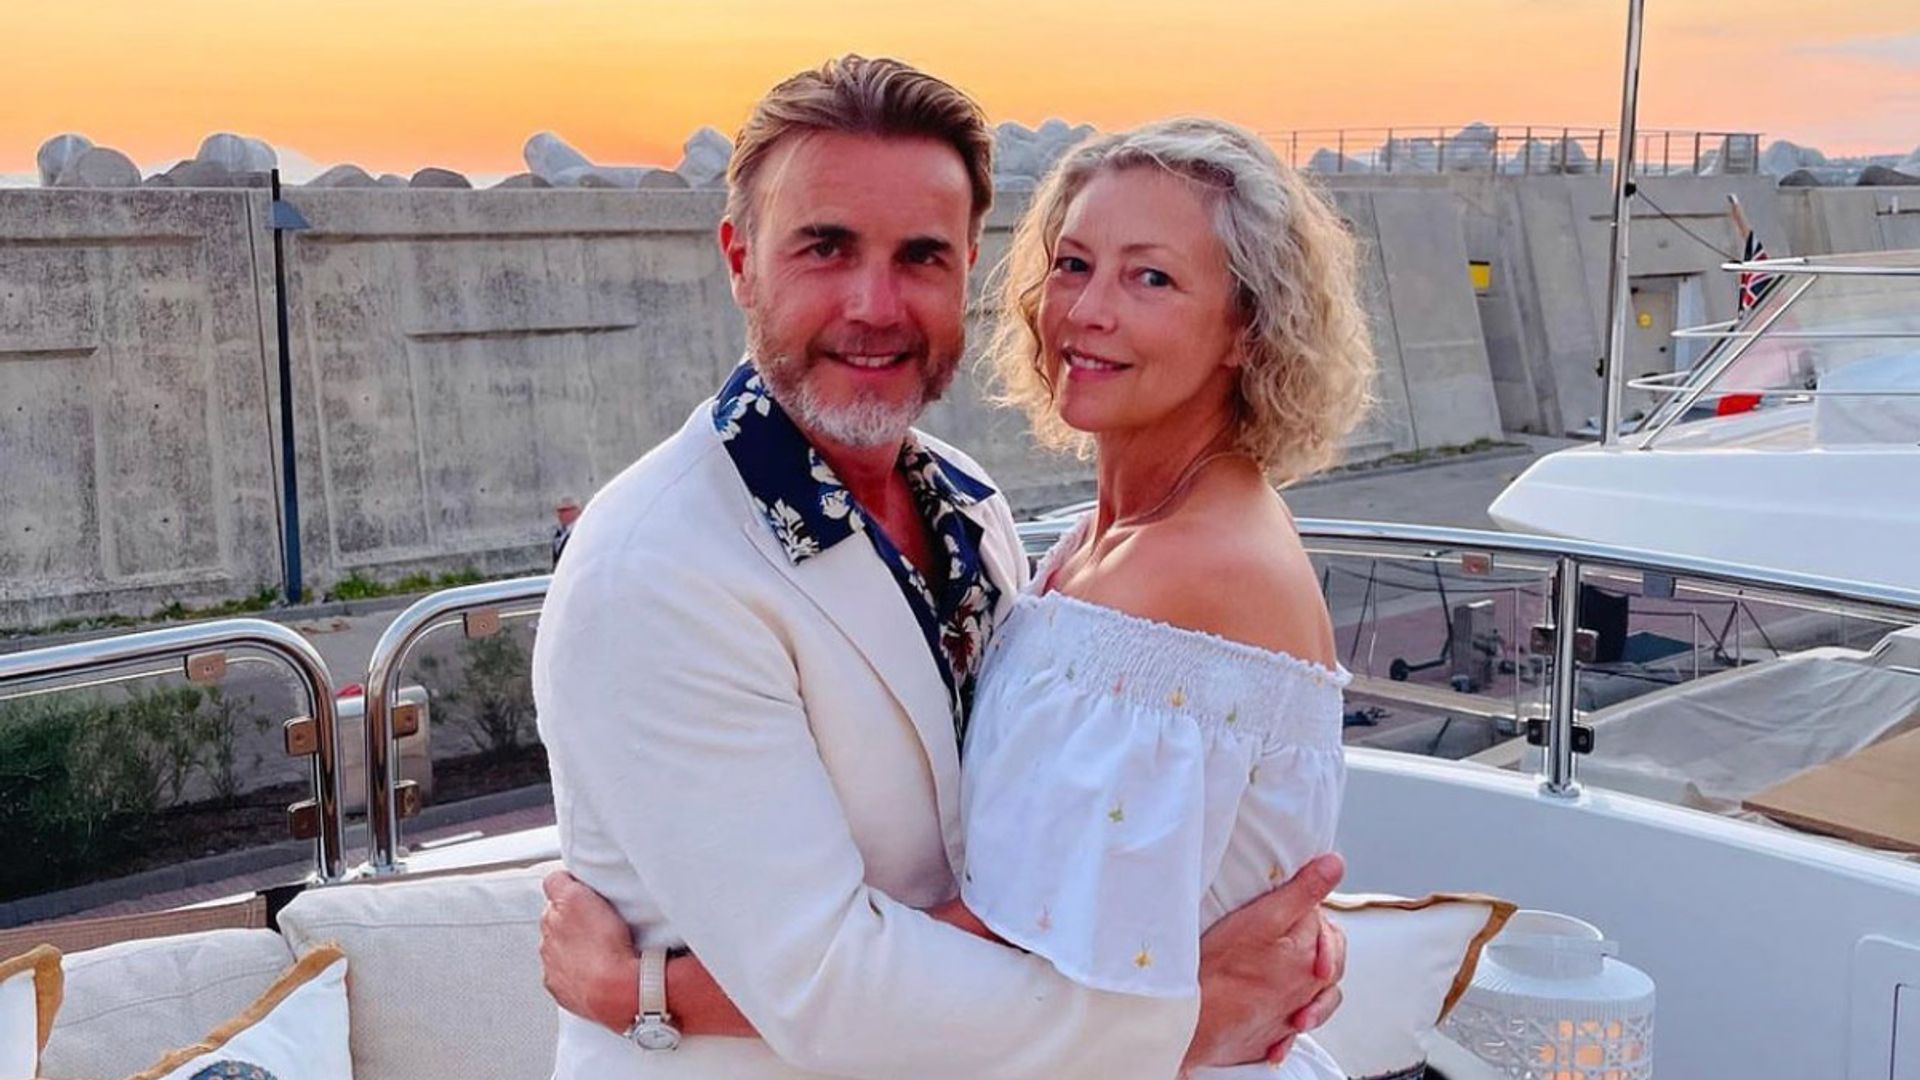 Gary Barlow and his wife Dawn have a BIG reason to celebrate! Photos